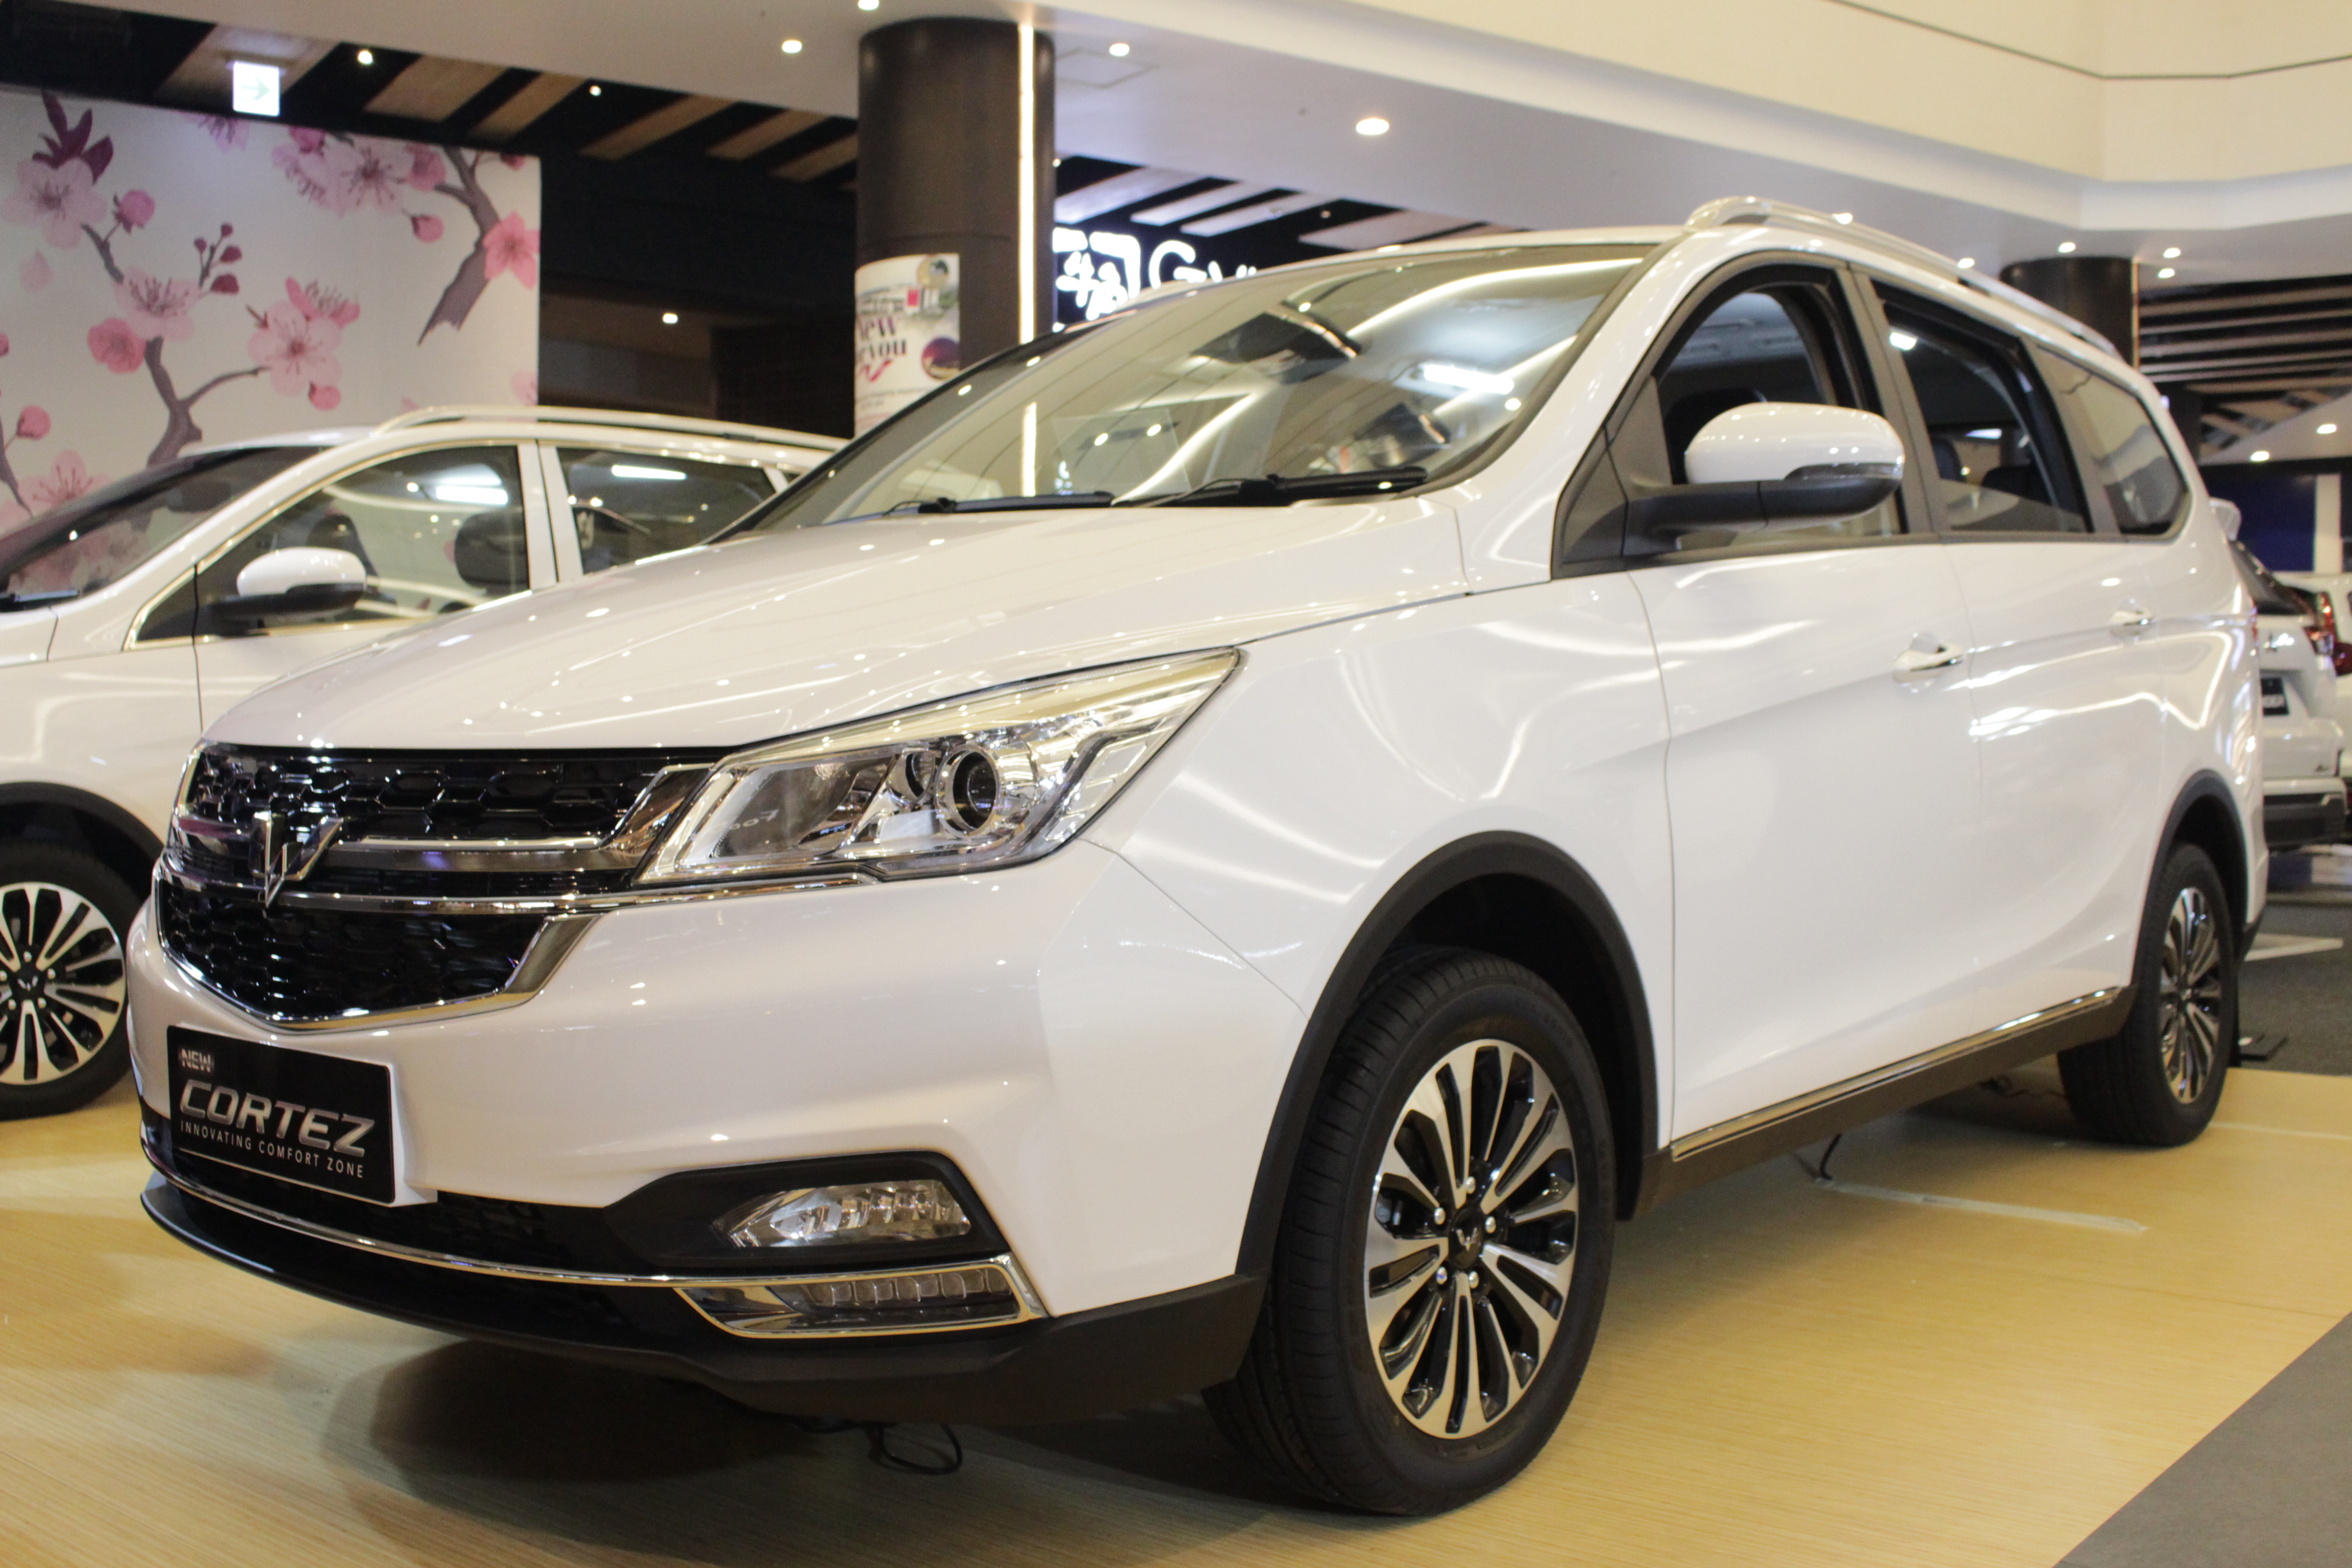 Image Wuling Introduces New Cortez, Innovating Comfort Zone, in Tangerang